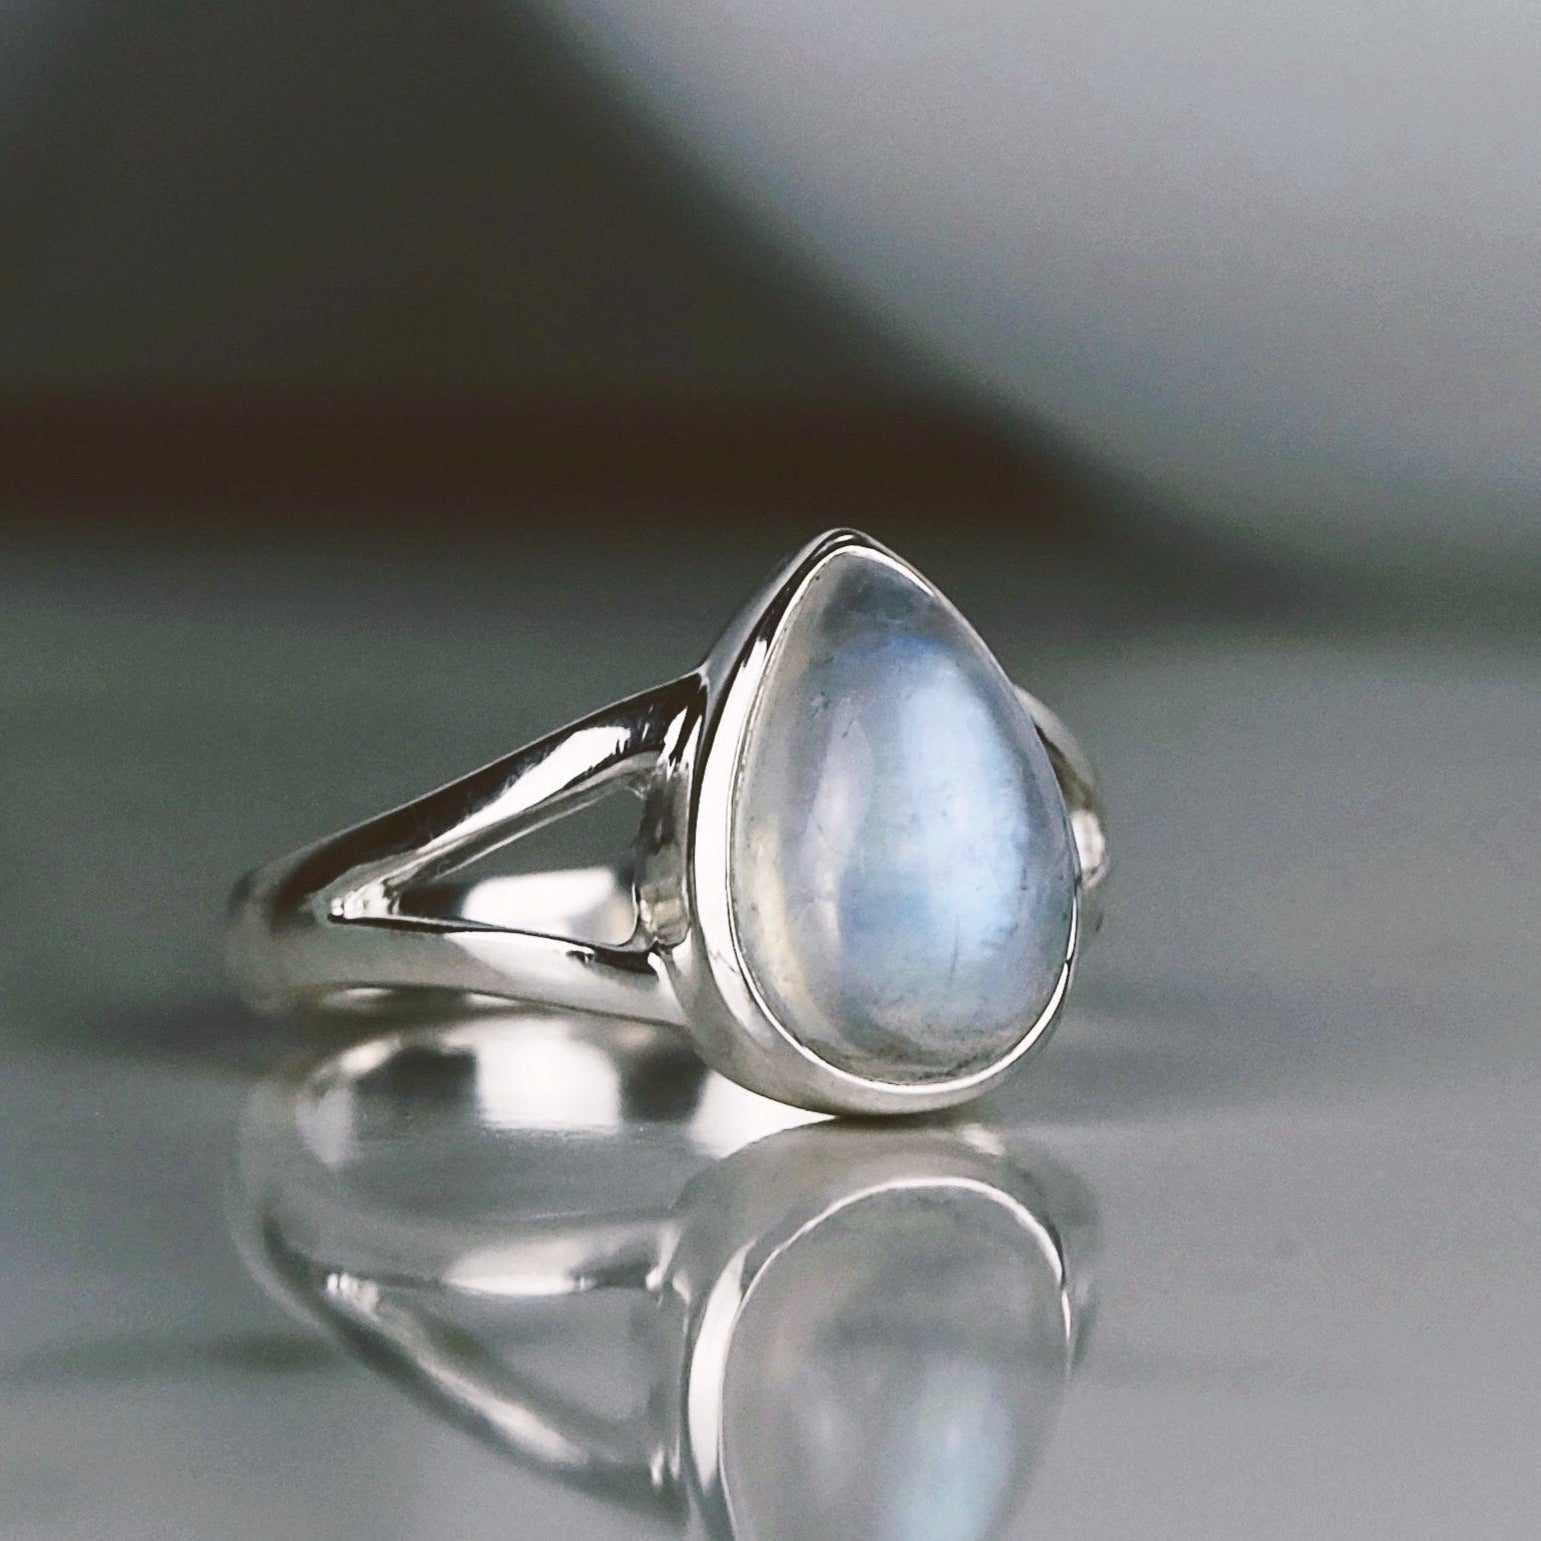 A rainbow moonstone teardrop ring from the side